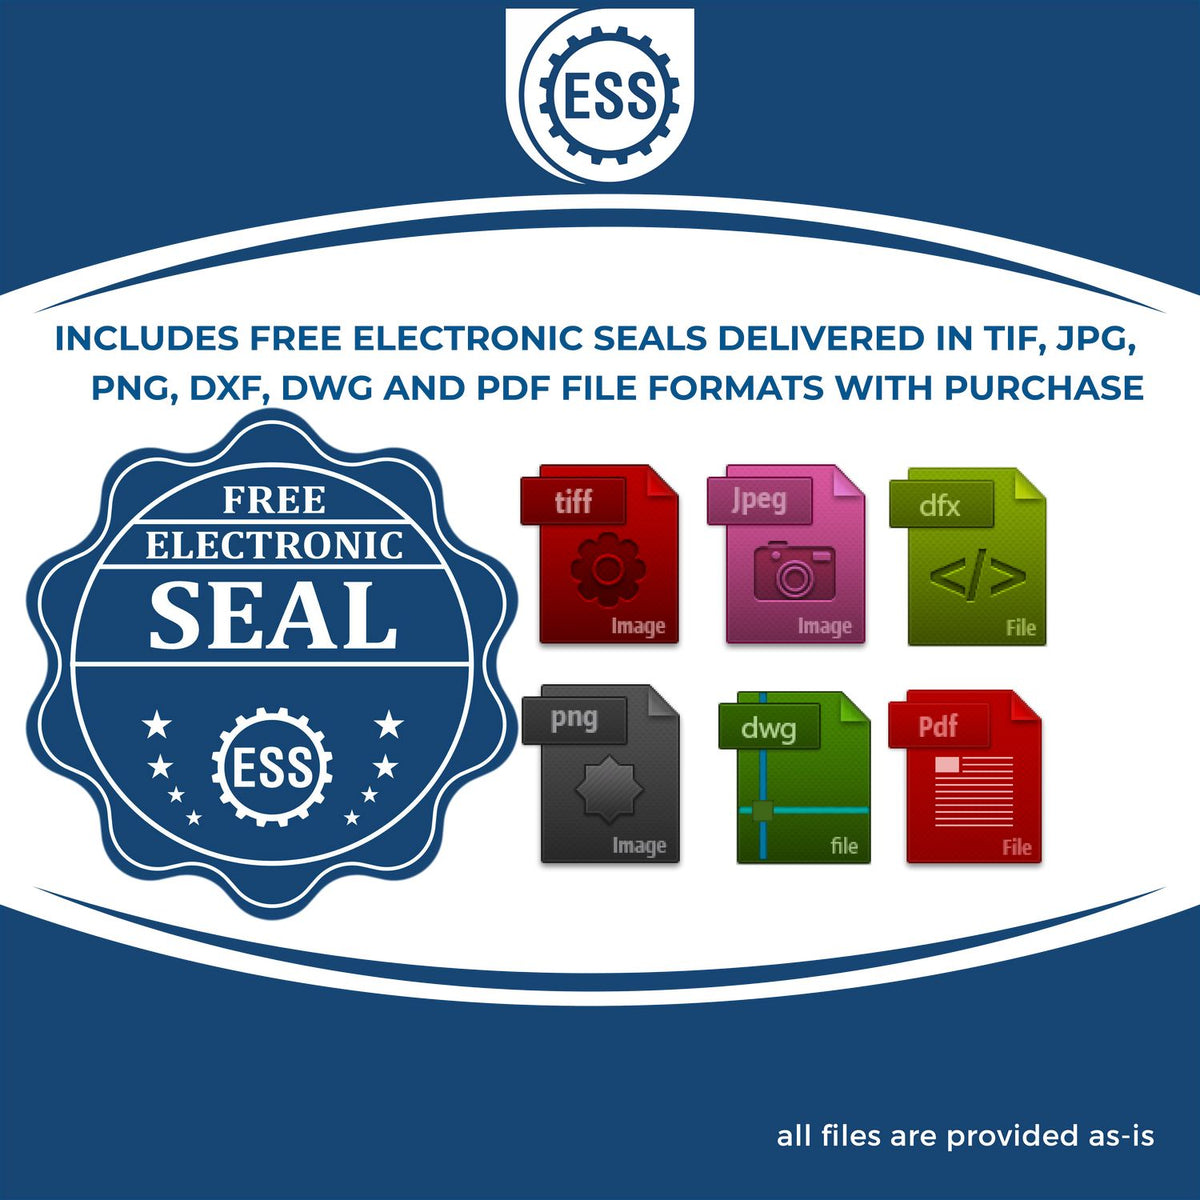 An infographic for the free electronic seal for the Gift Minnesota Landscape Architect Seal illustrating the different file type icons such as DXF, DWG, TIF, JPG and PNG.